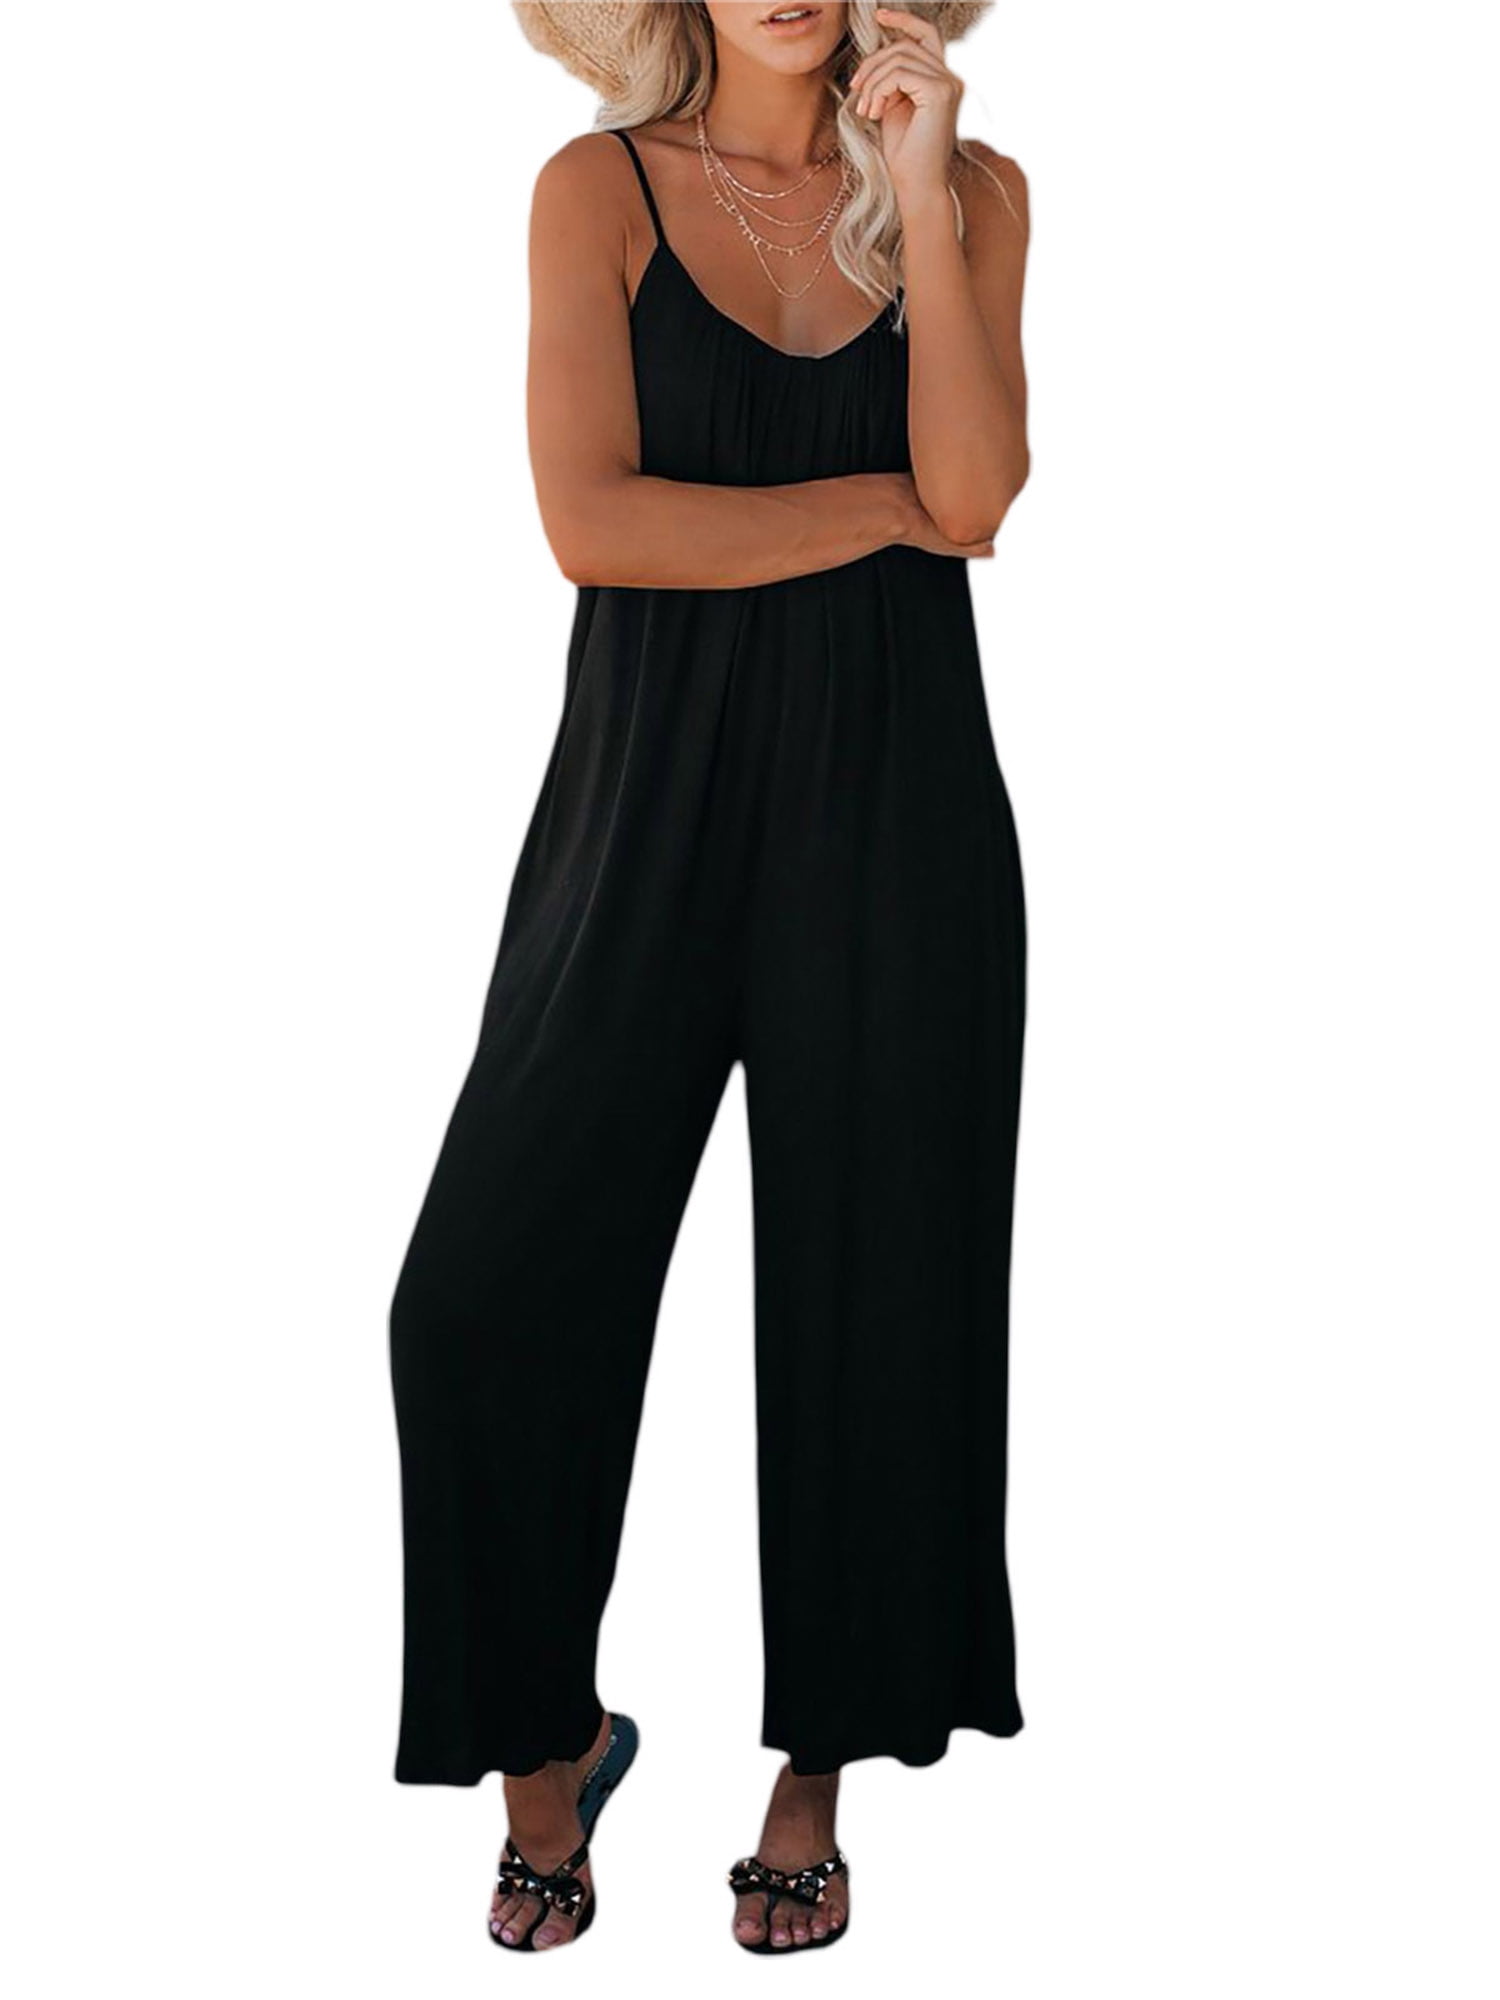 Womens Ladies Lagenlook Cami Strappy Baggy Hareem Jumpsuit Play-suit Dress Top 